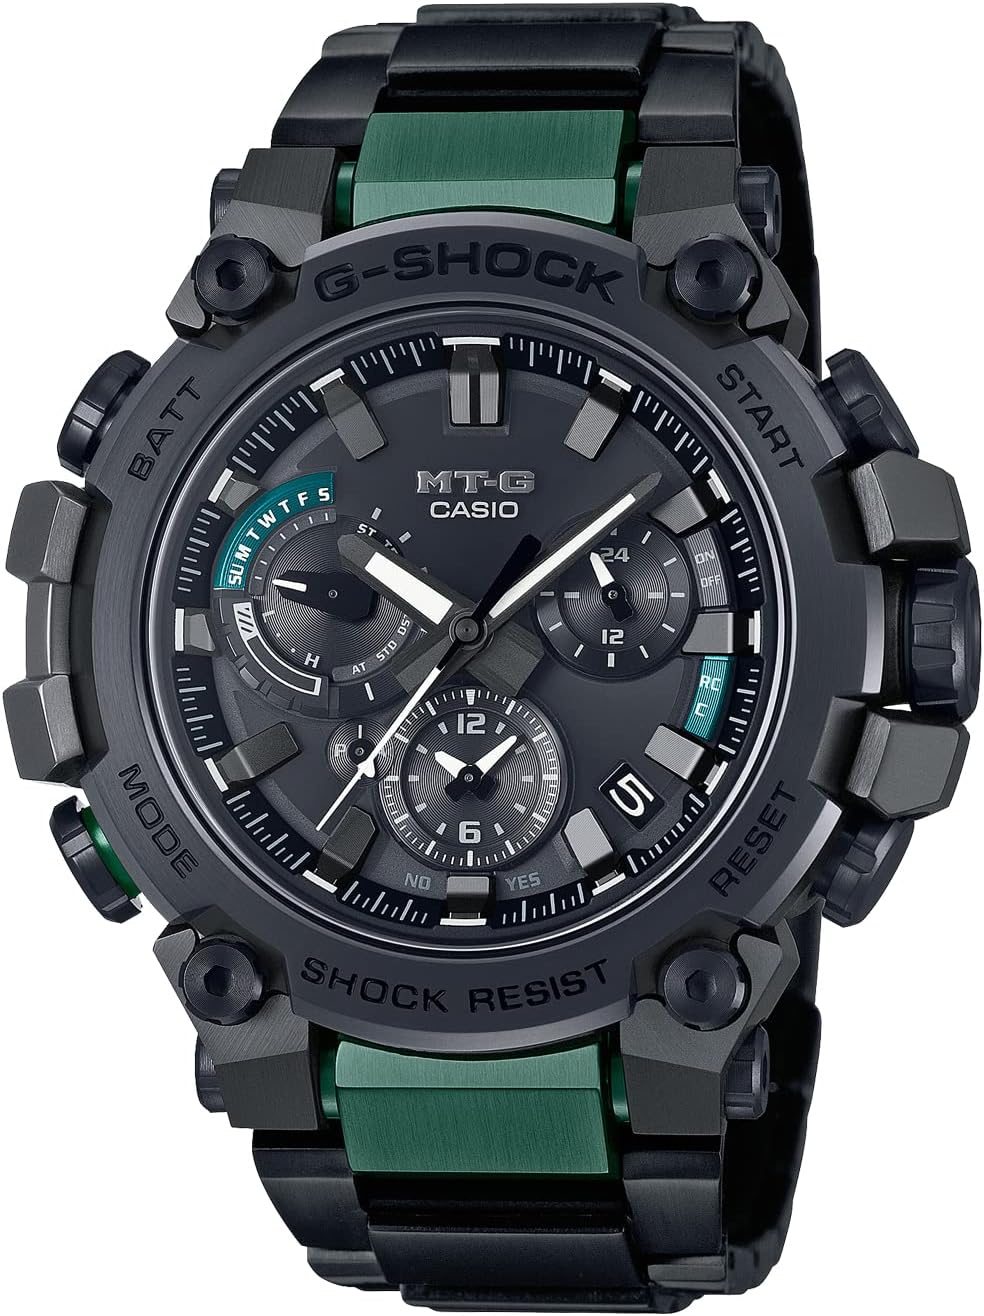 Casio MTG-B3000BD-1A2JF [G-Shock MTG-B3000 Series Men's Metal Band] Watch Shipped from Japan Released in Apr 2022